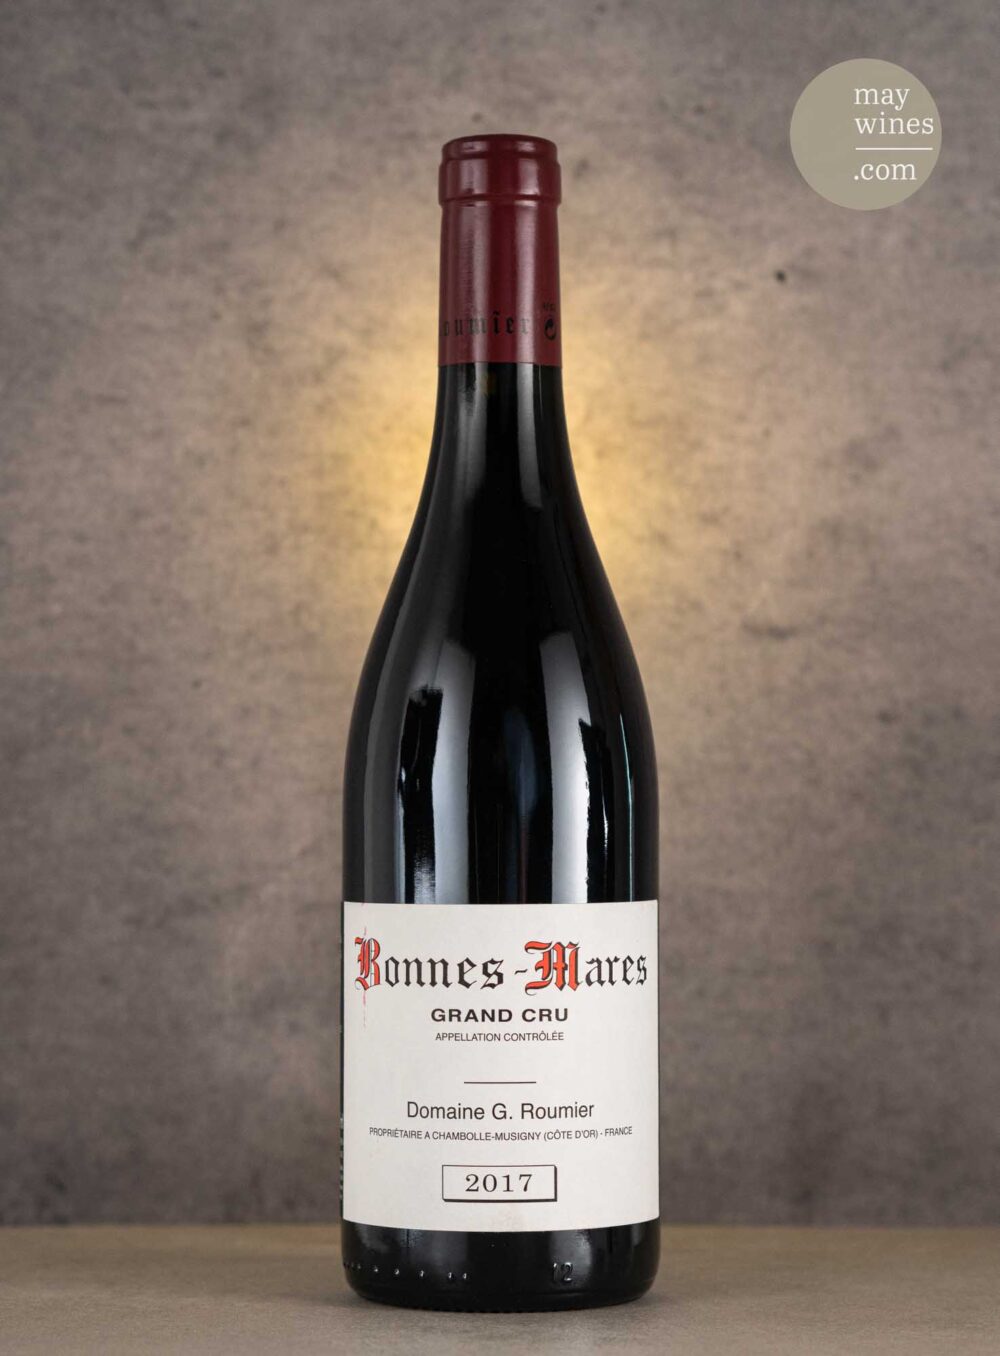 May Wines – Rotwein – 2017 Bonnes Mares Grand Cru - Domaine G. Roumier